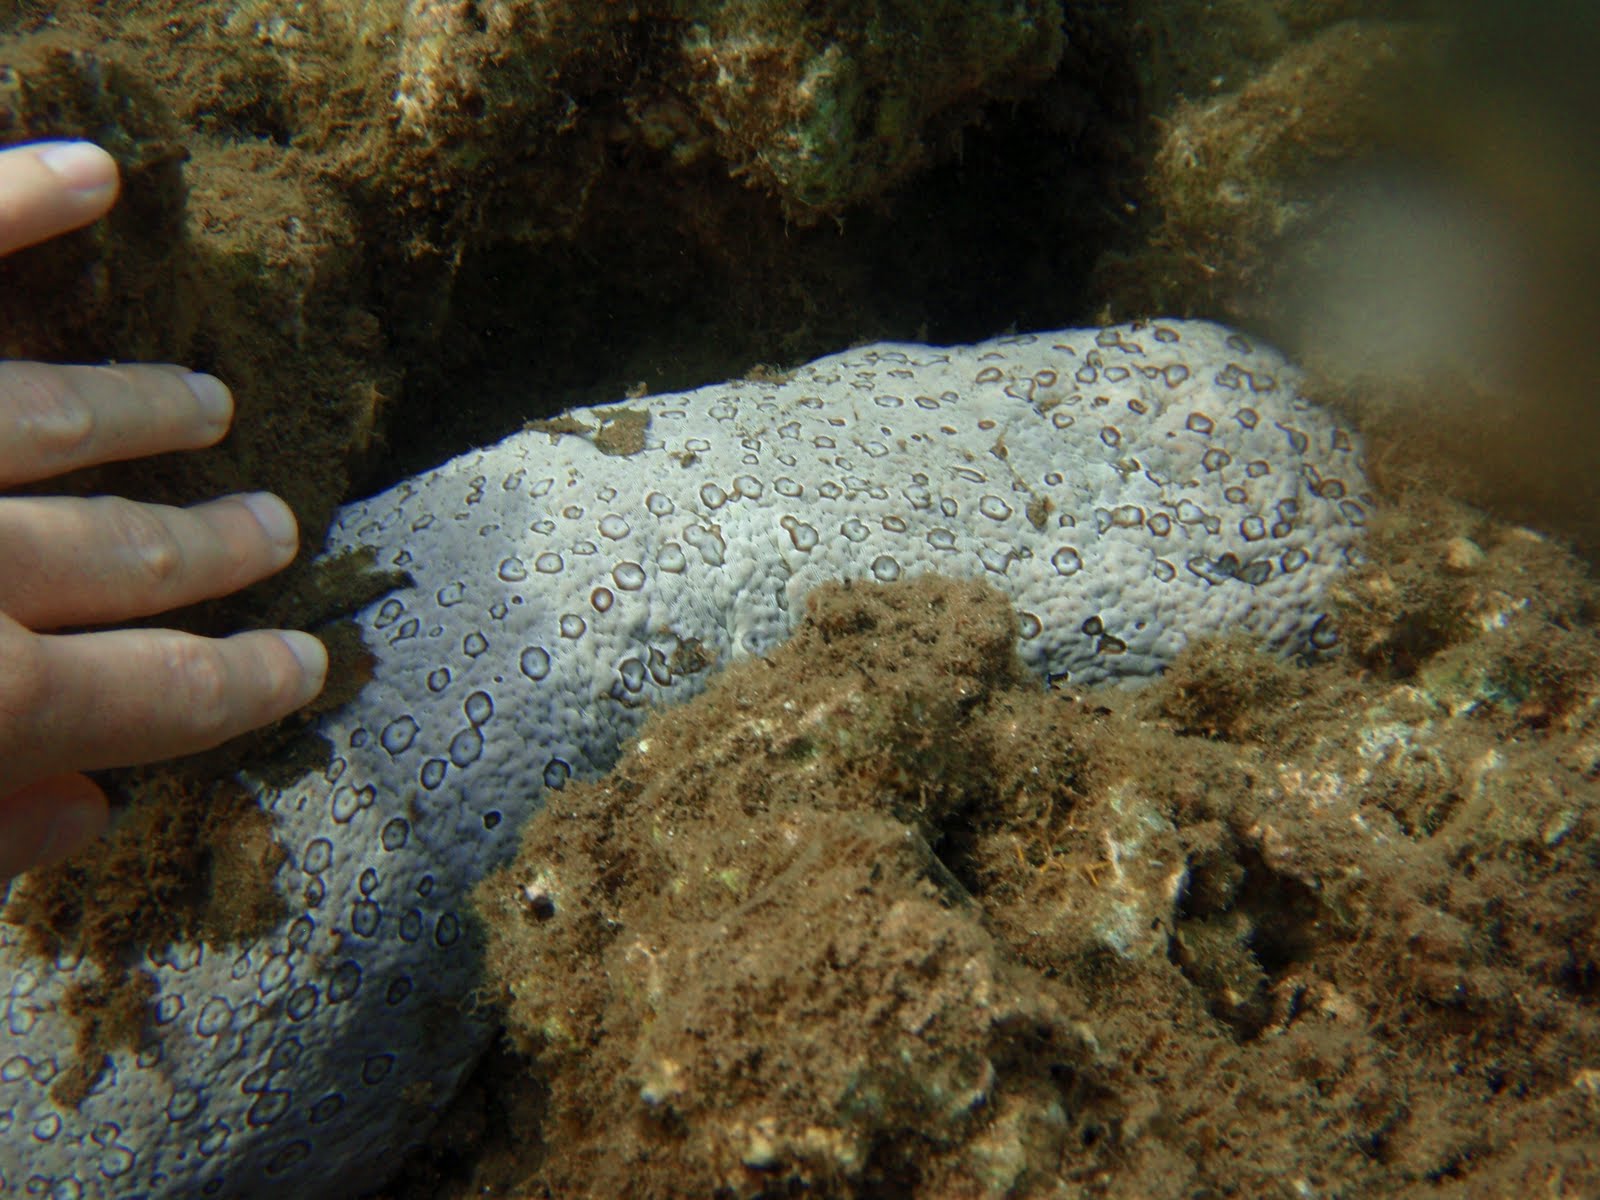 Pale spotted sea cucumber